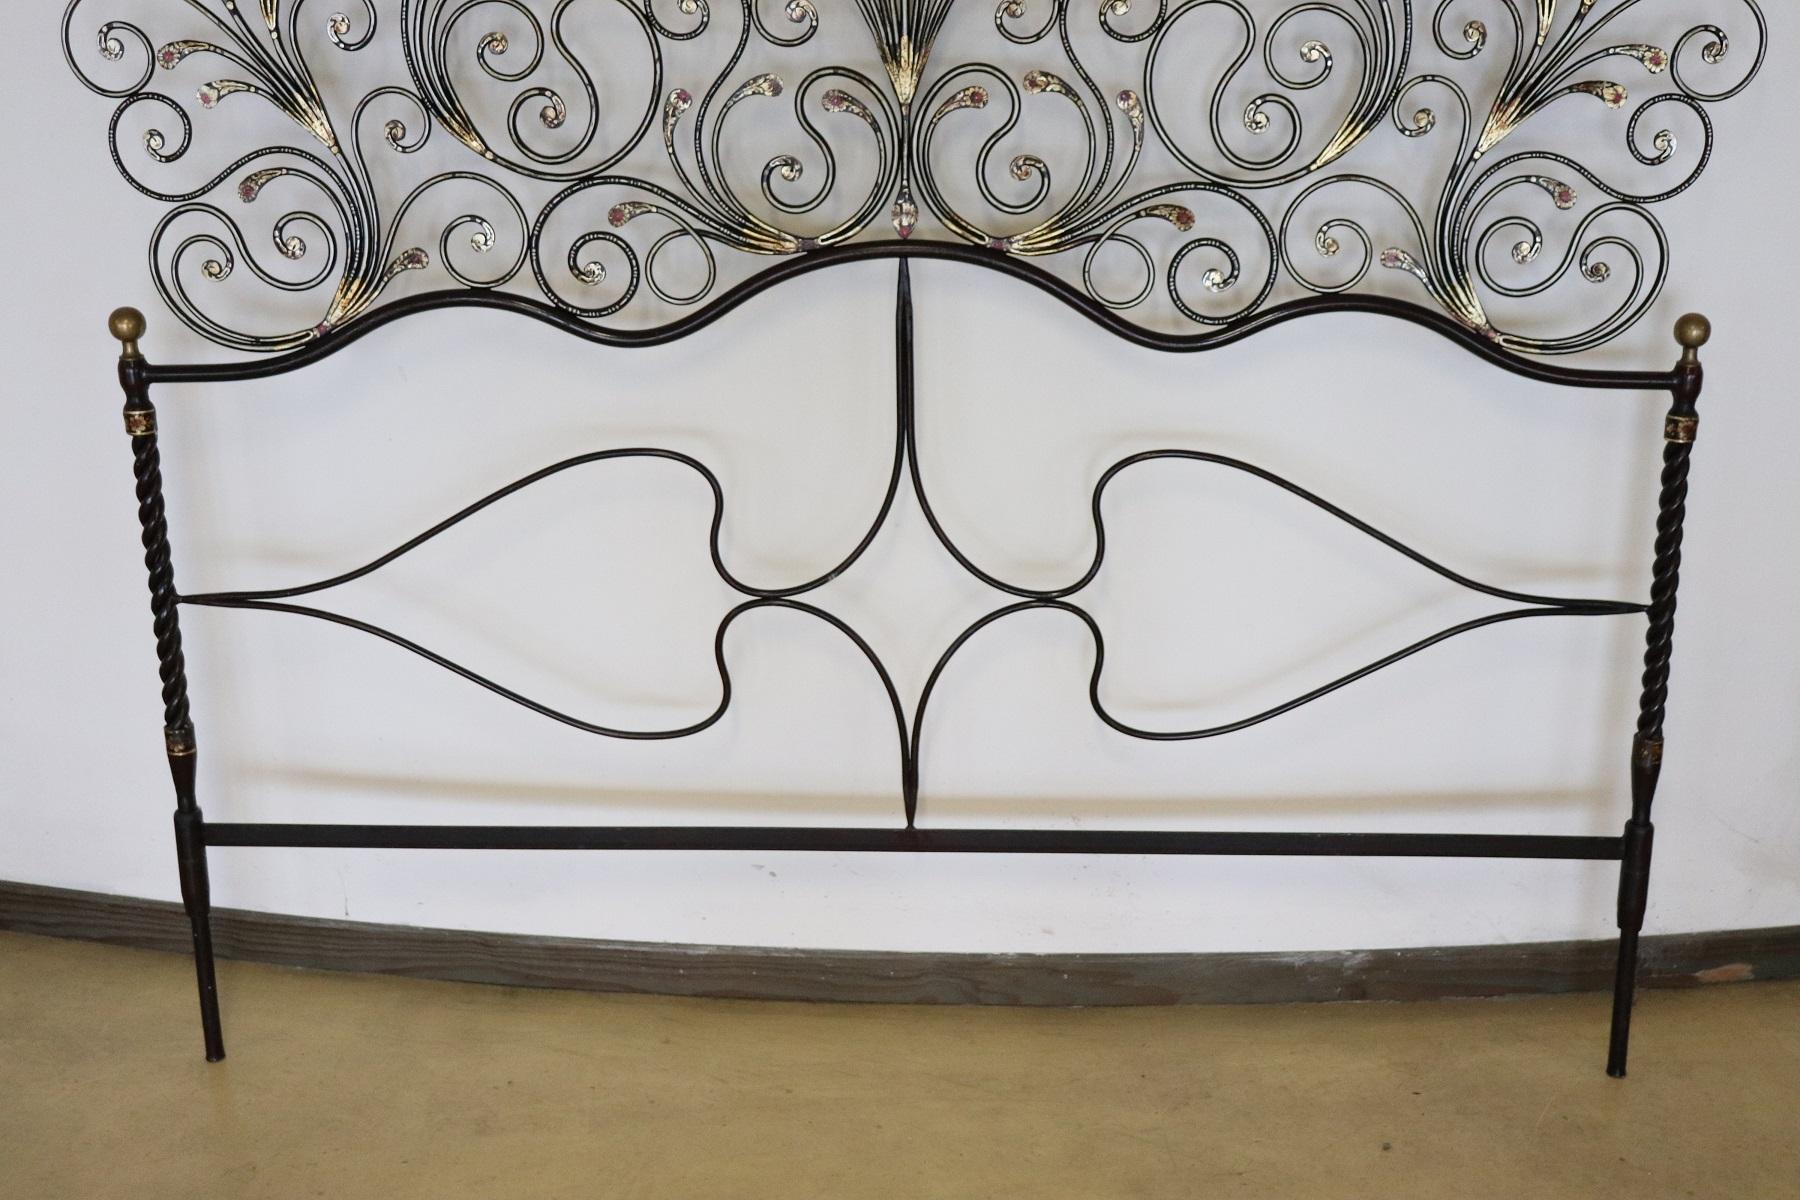 Gilt 20th Century Italian Baroque Style Gilded Wrought Iron Headboard with Sconces